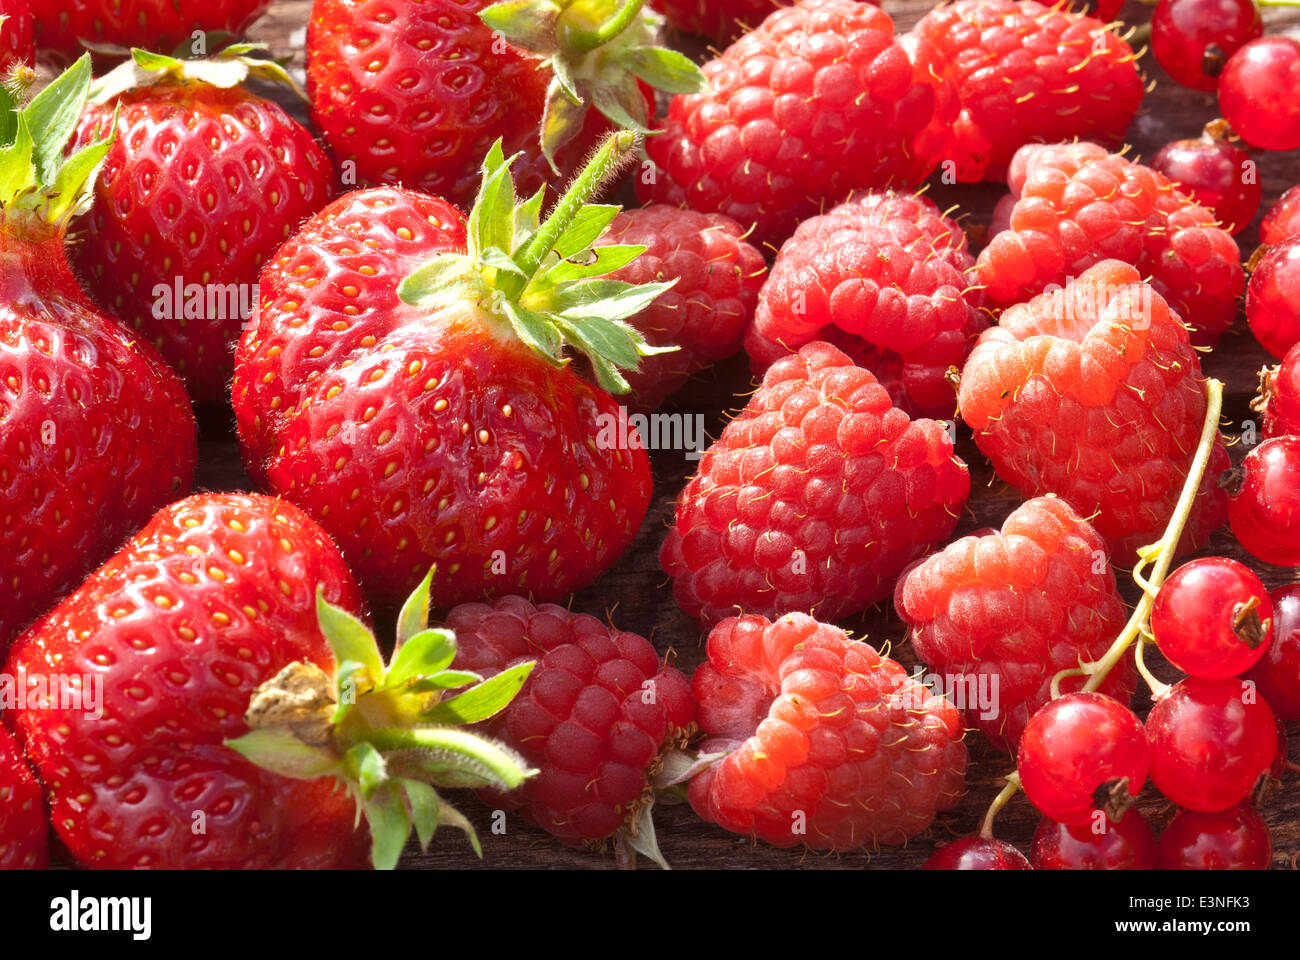 Mixed soft summer fruits - strawberries, raspberries and red currants Stock Photo